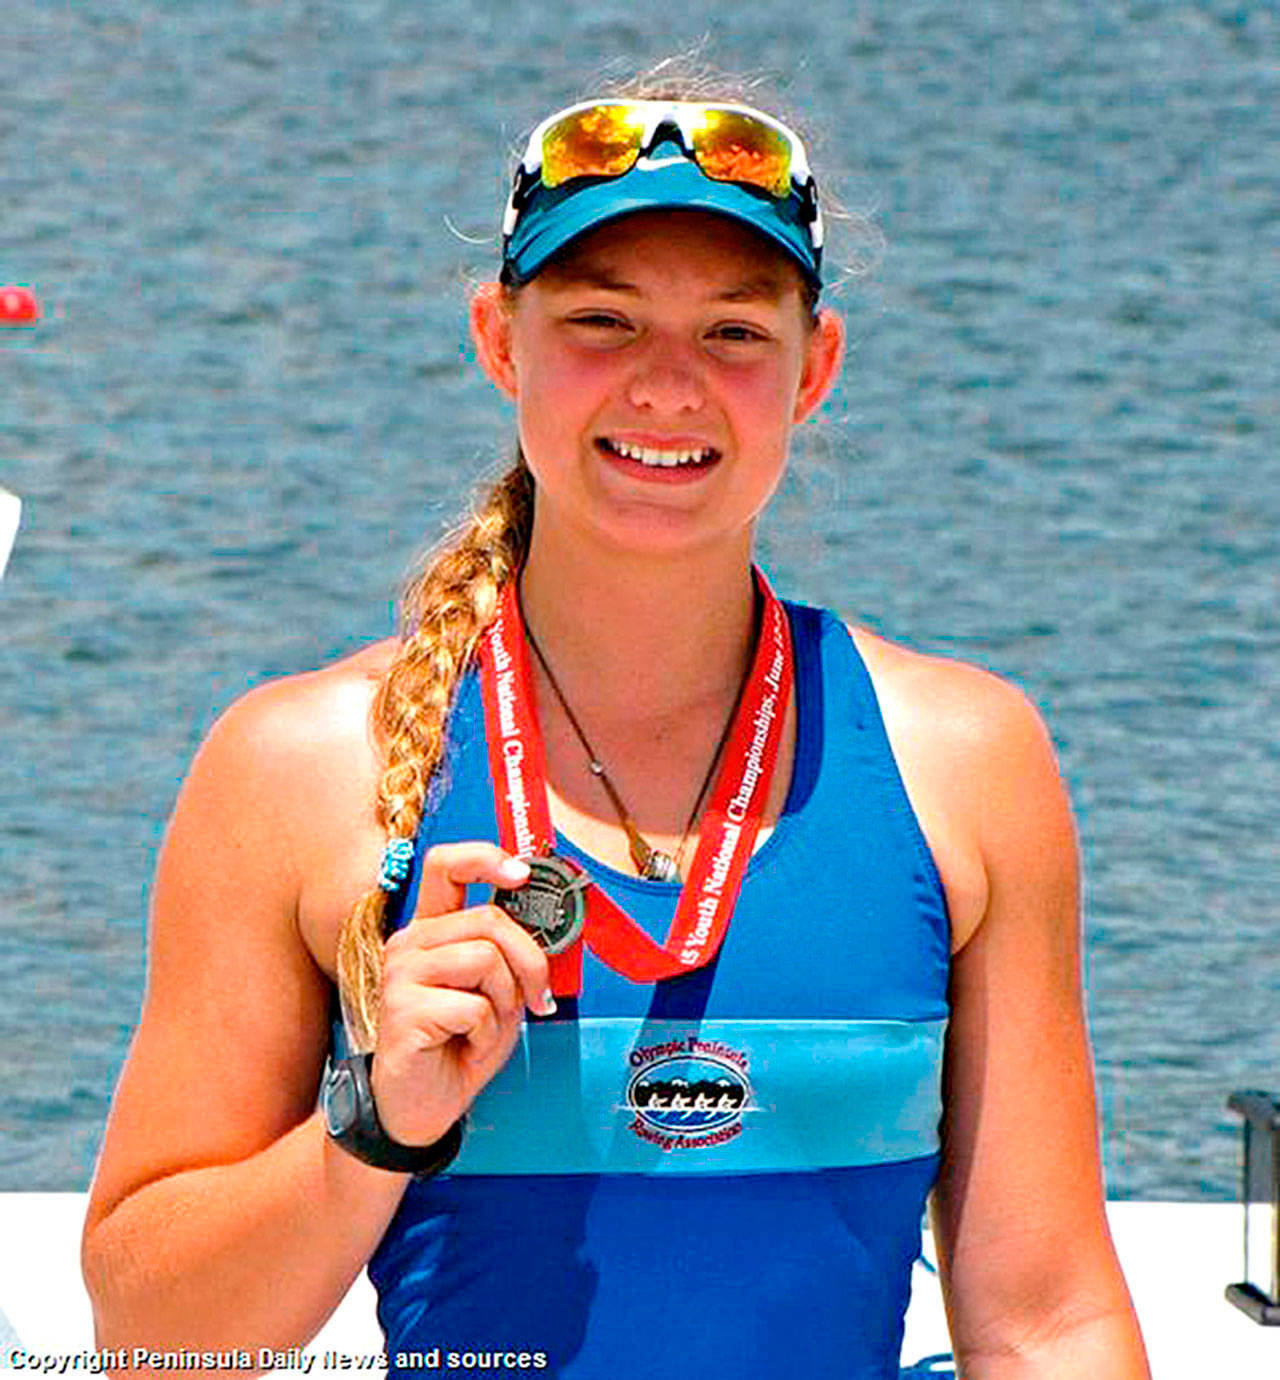 Sequim’s Elise Beuke with her U.S. Rowing Youth silver medal in 2015. Beuke, now an NCAA championship rower for the University of Washington, will row in the women’s 8 boat at the U23 World Rowing Championships in Bulgaria July 19-23.